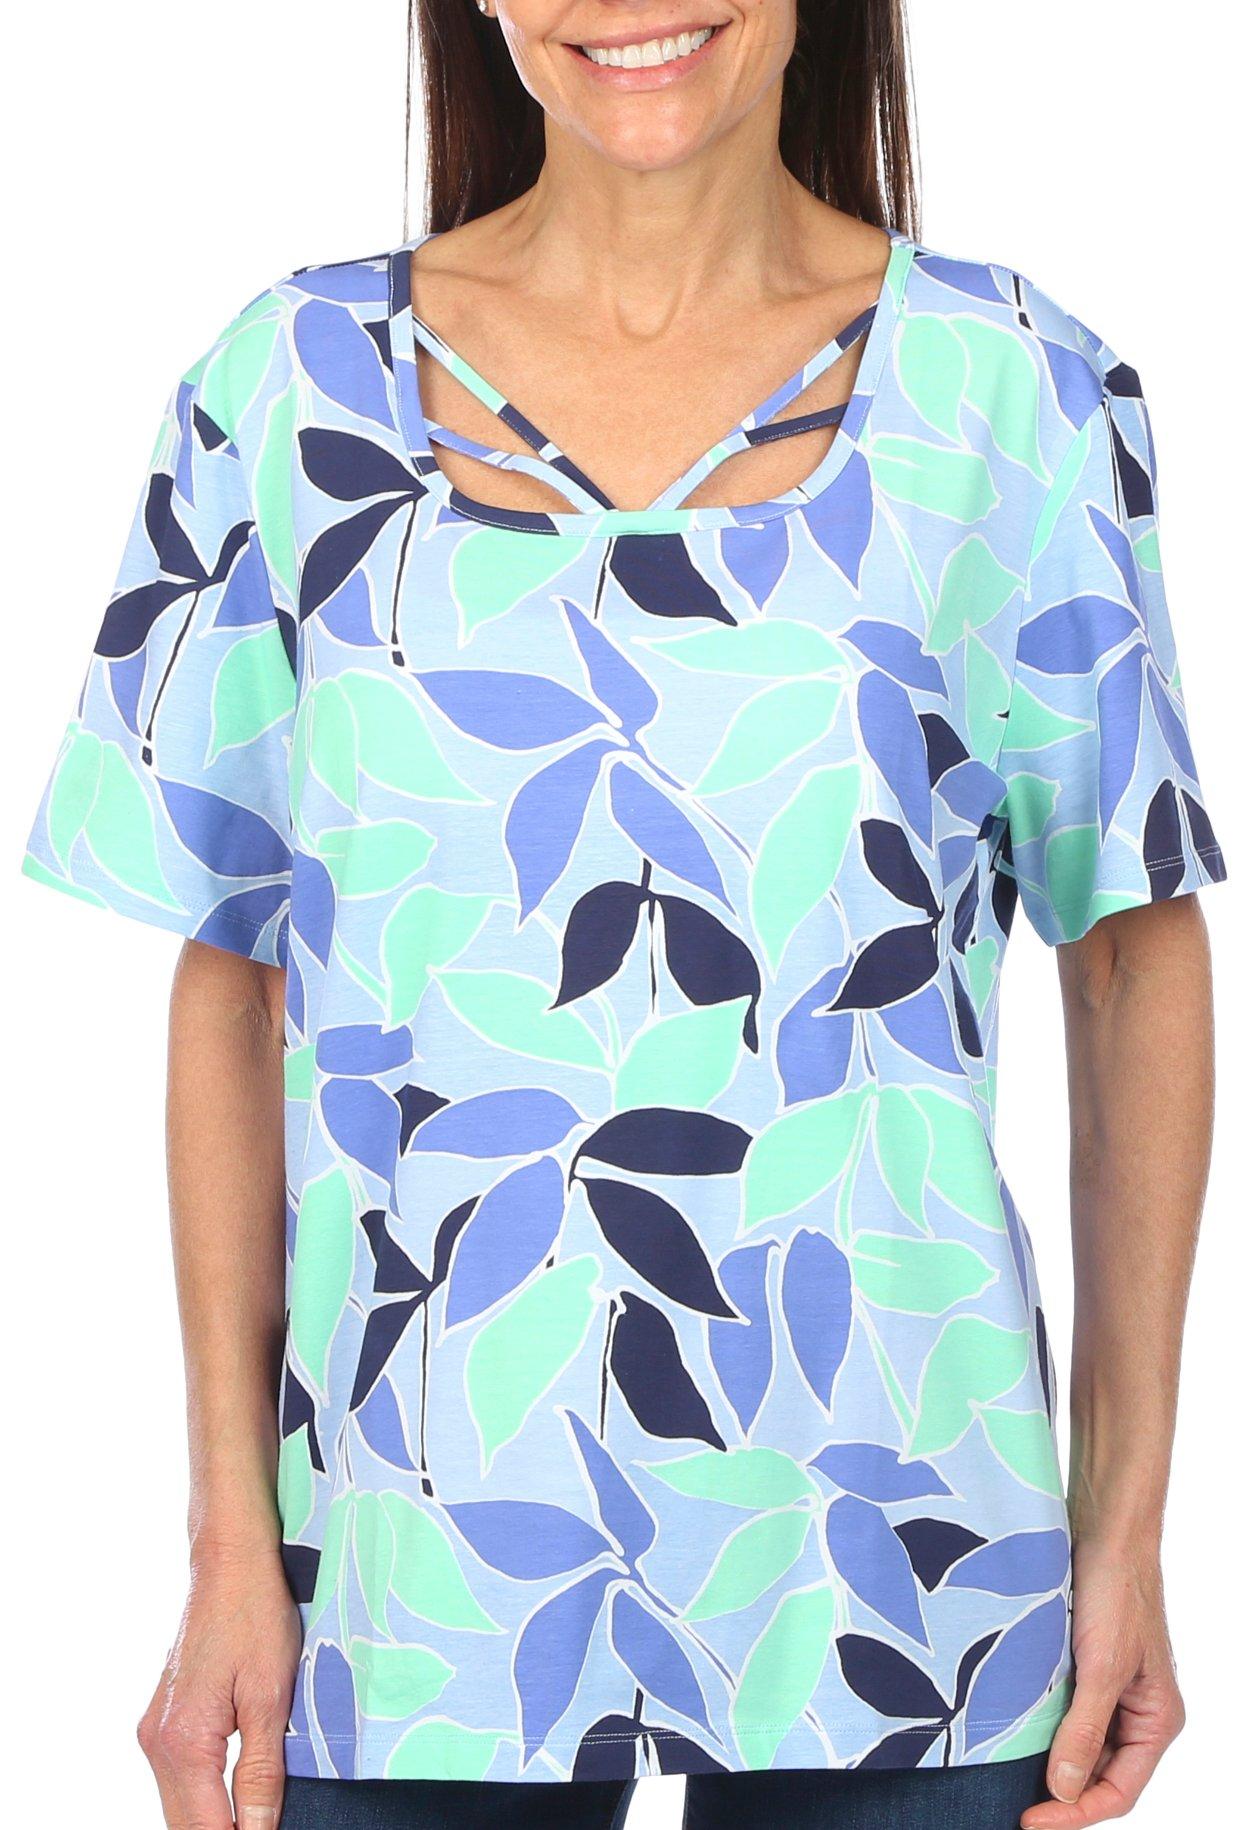 Coral Bay Womens Leaves Print Square Keyhole Top